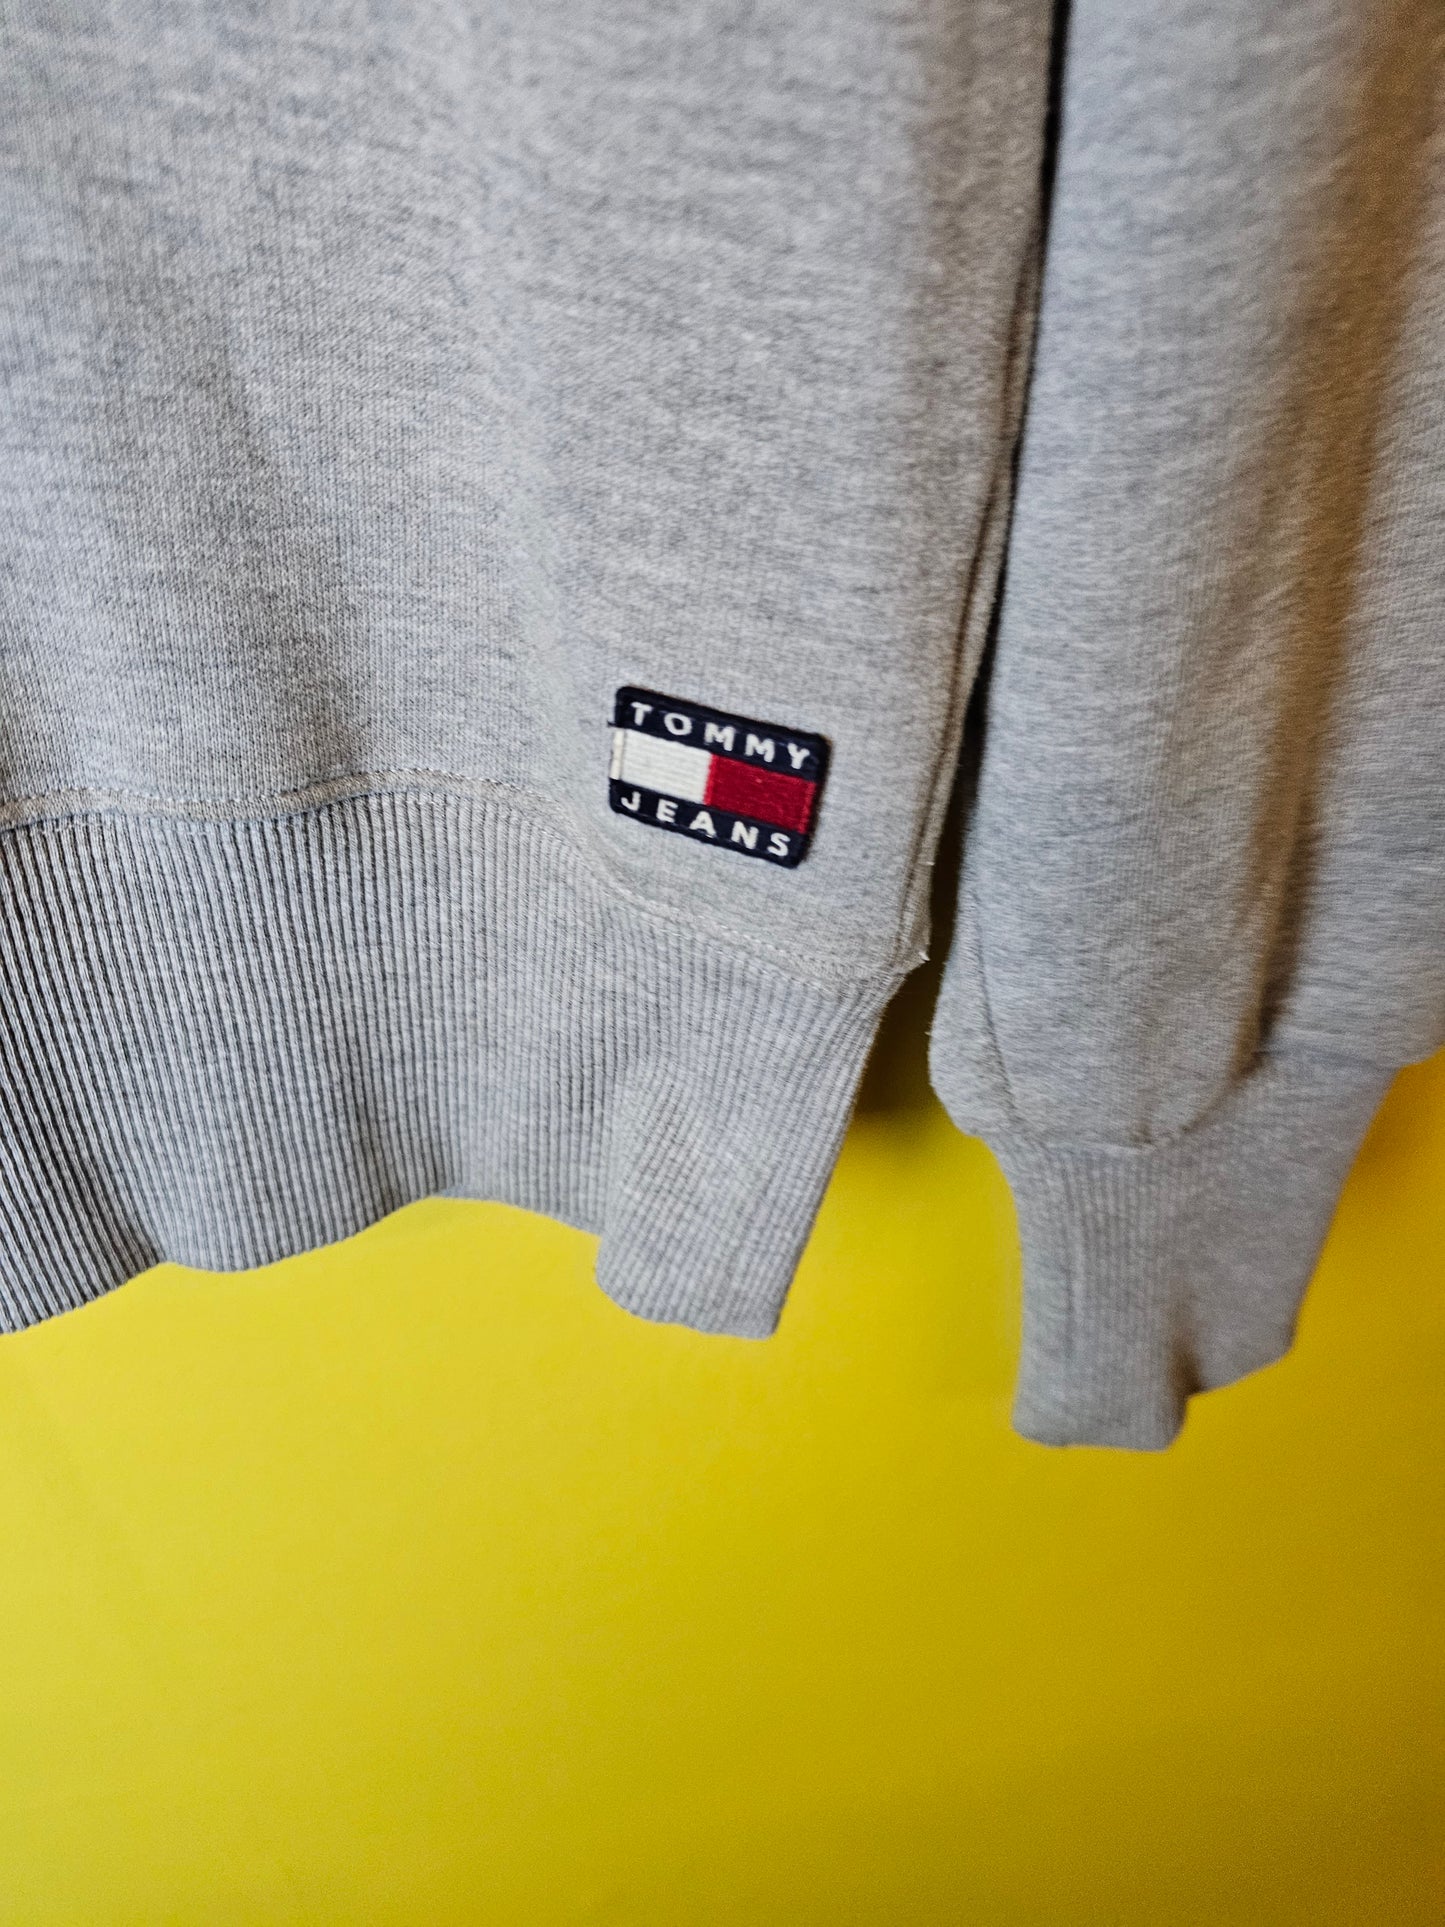 Tommy Jeans Embroidered Flag Sweater (S)